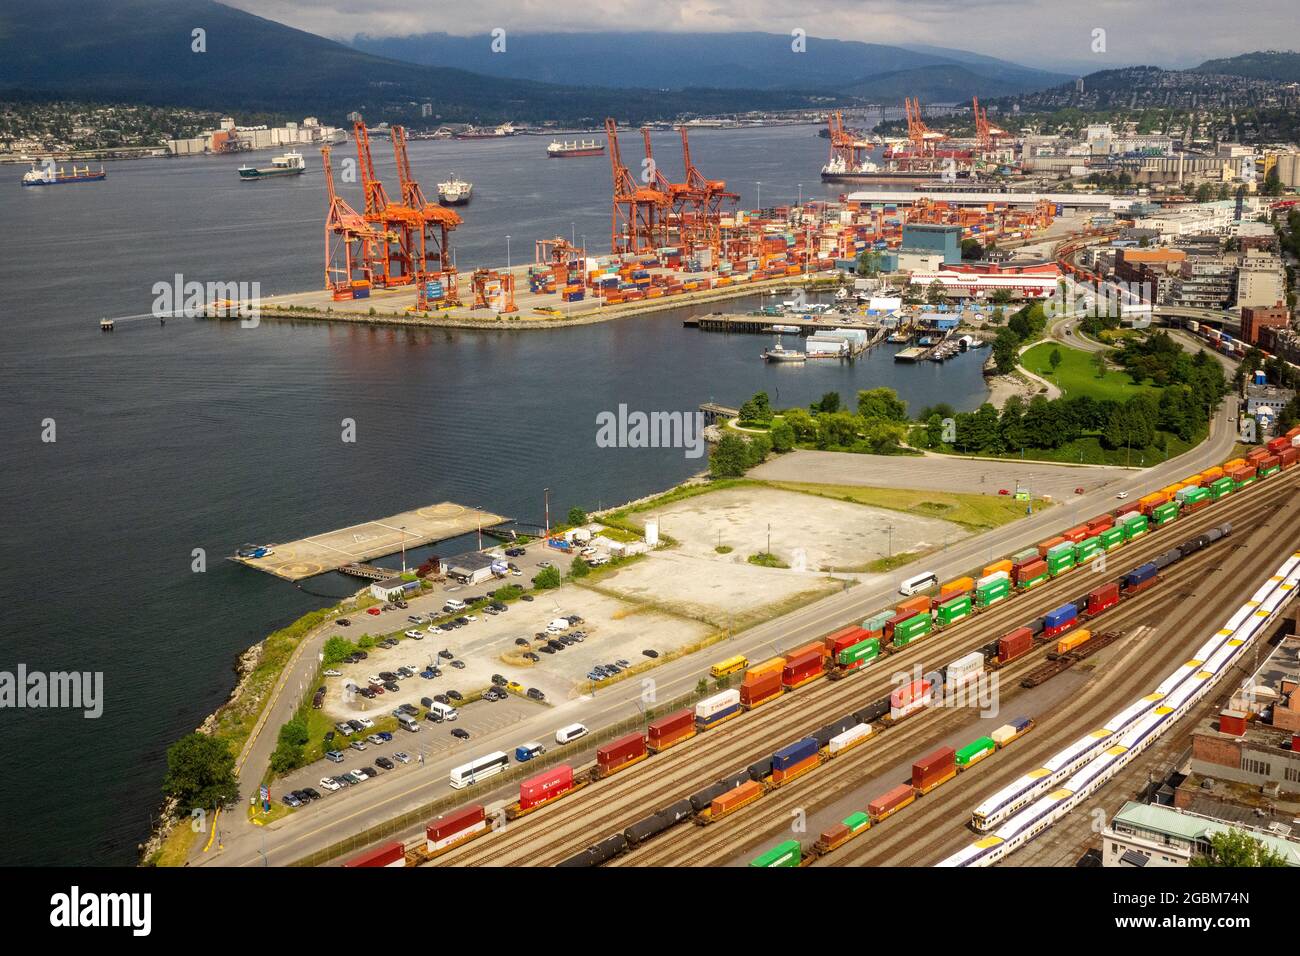 Vancouver Harbour Commercial Docks And Railway Sidings With Sea Containers Vancouver British Columbia Largest Port In Canada Stock Photo